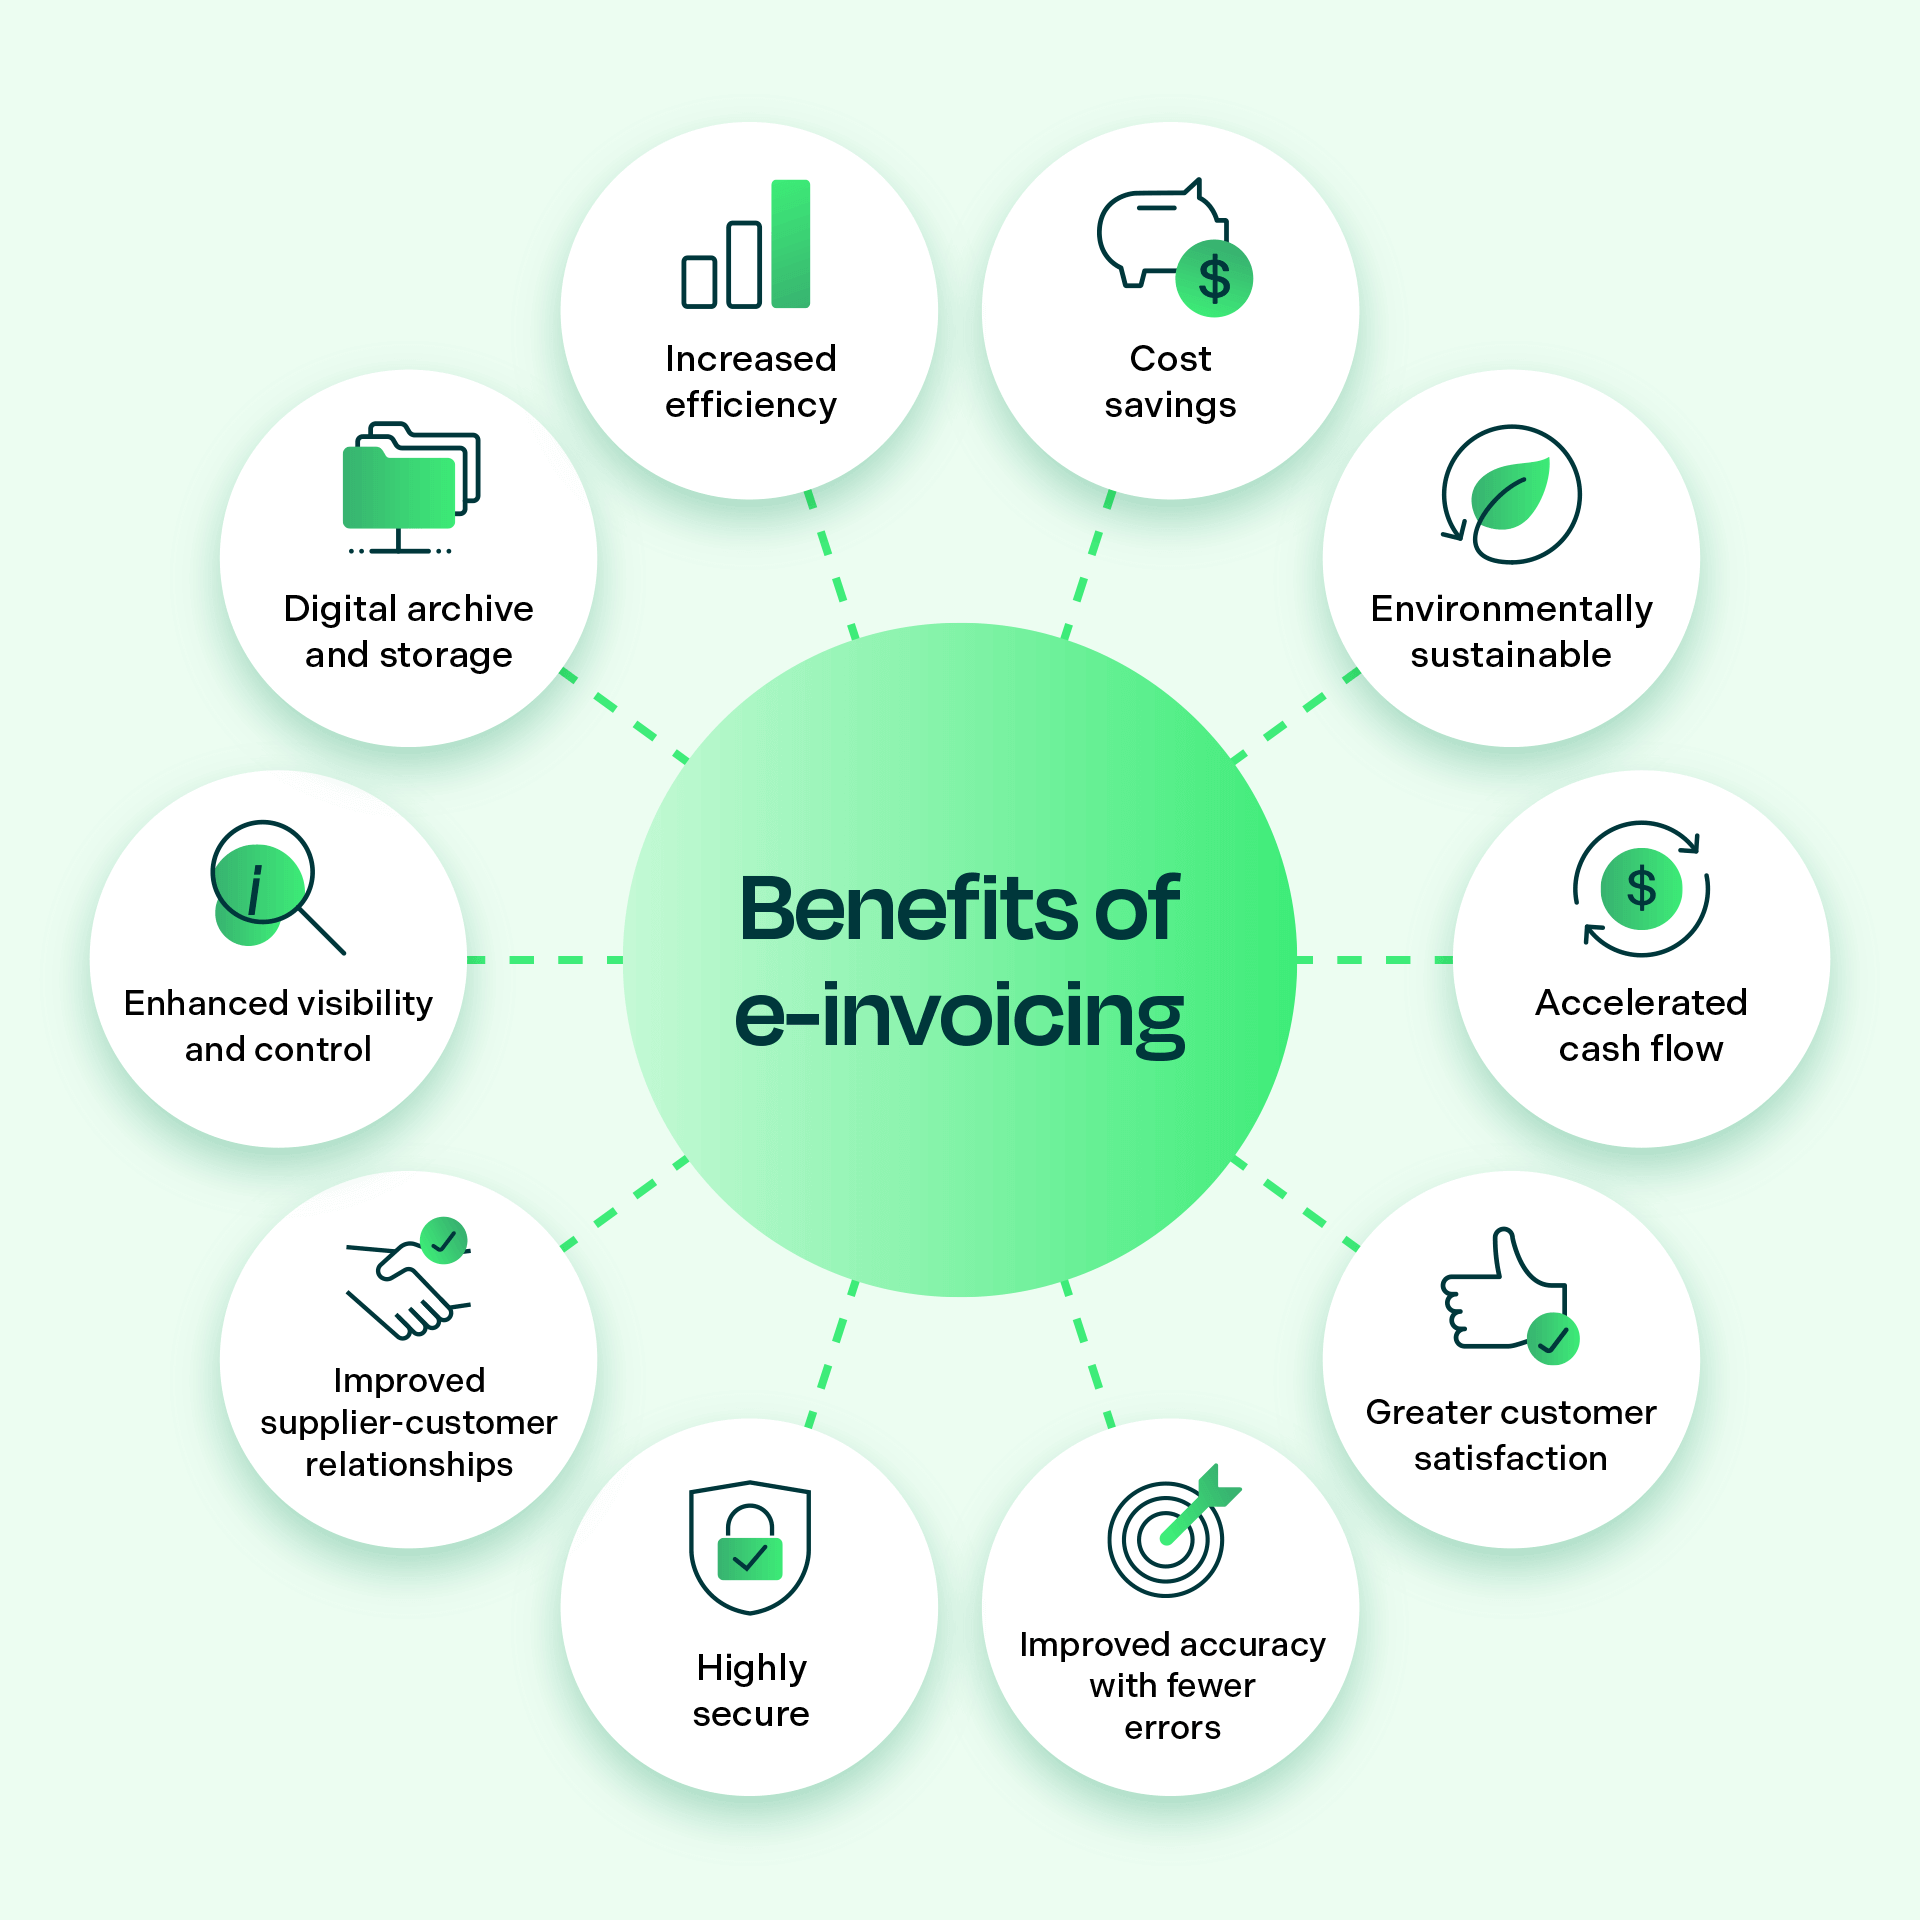 benefits of e-invoicing in a circle with various circles with icons and text